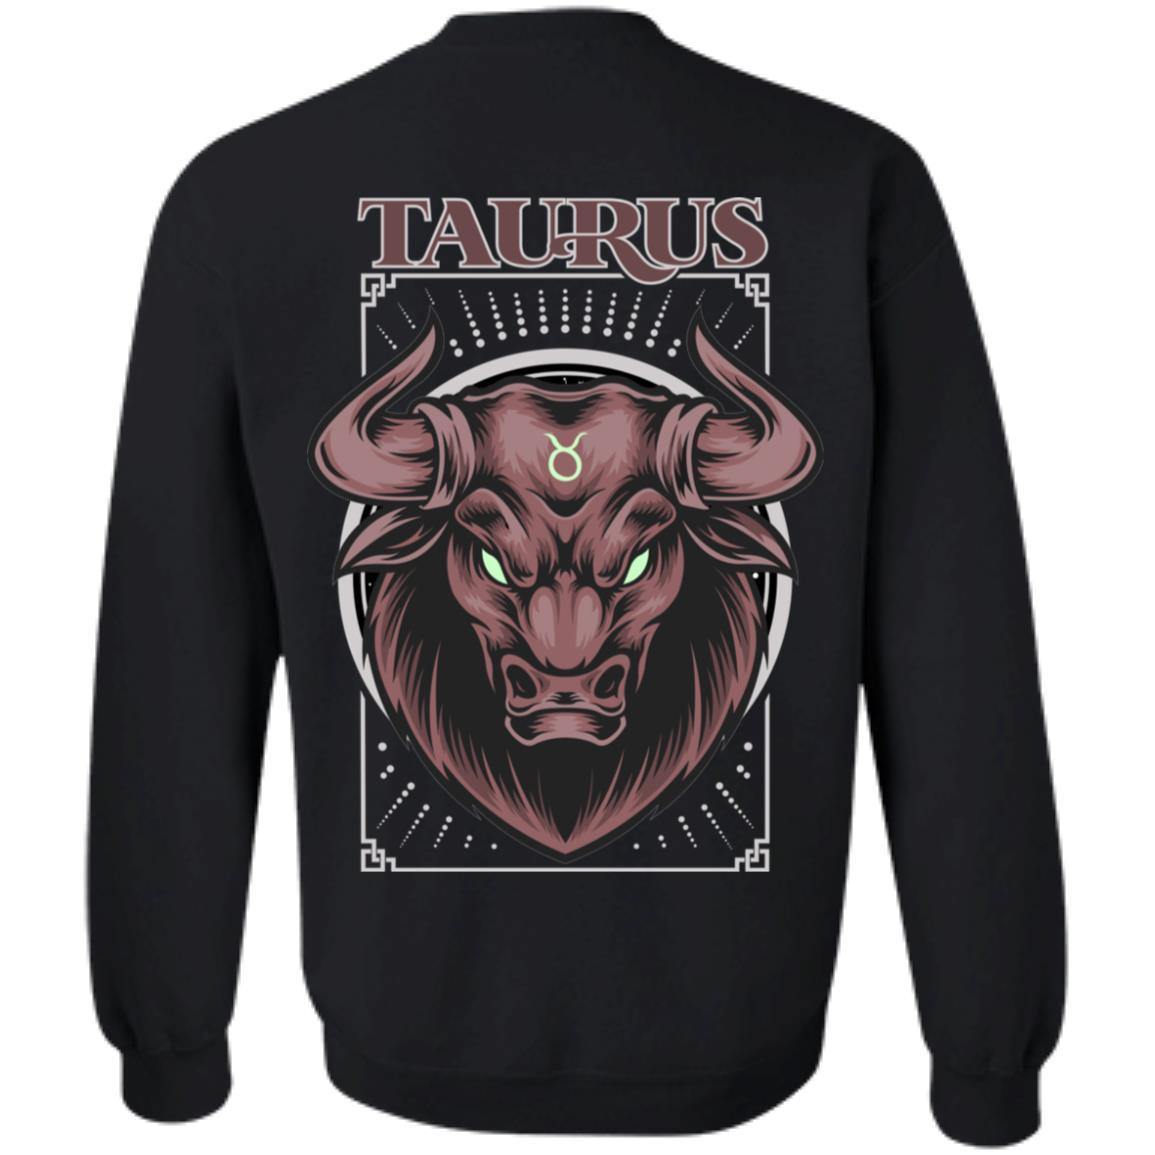 TAURUS DESIGN ON BACK AND SMALL SCORP ZONE LOGO ON FRONT -Z65 Crewneck Pullover Sweatshirt - ScorpZone